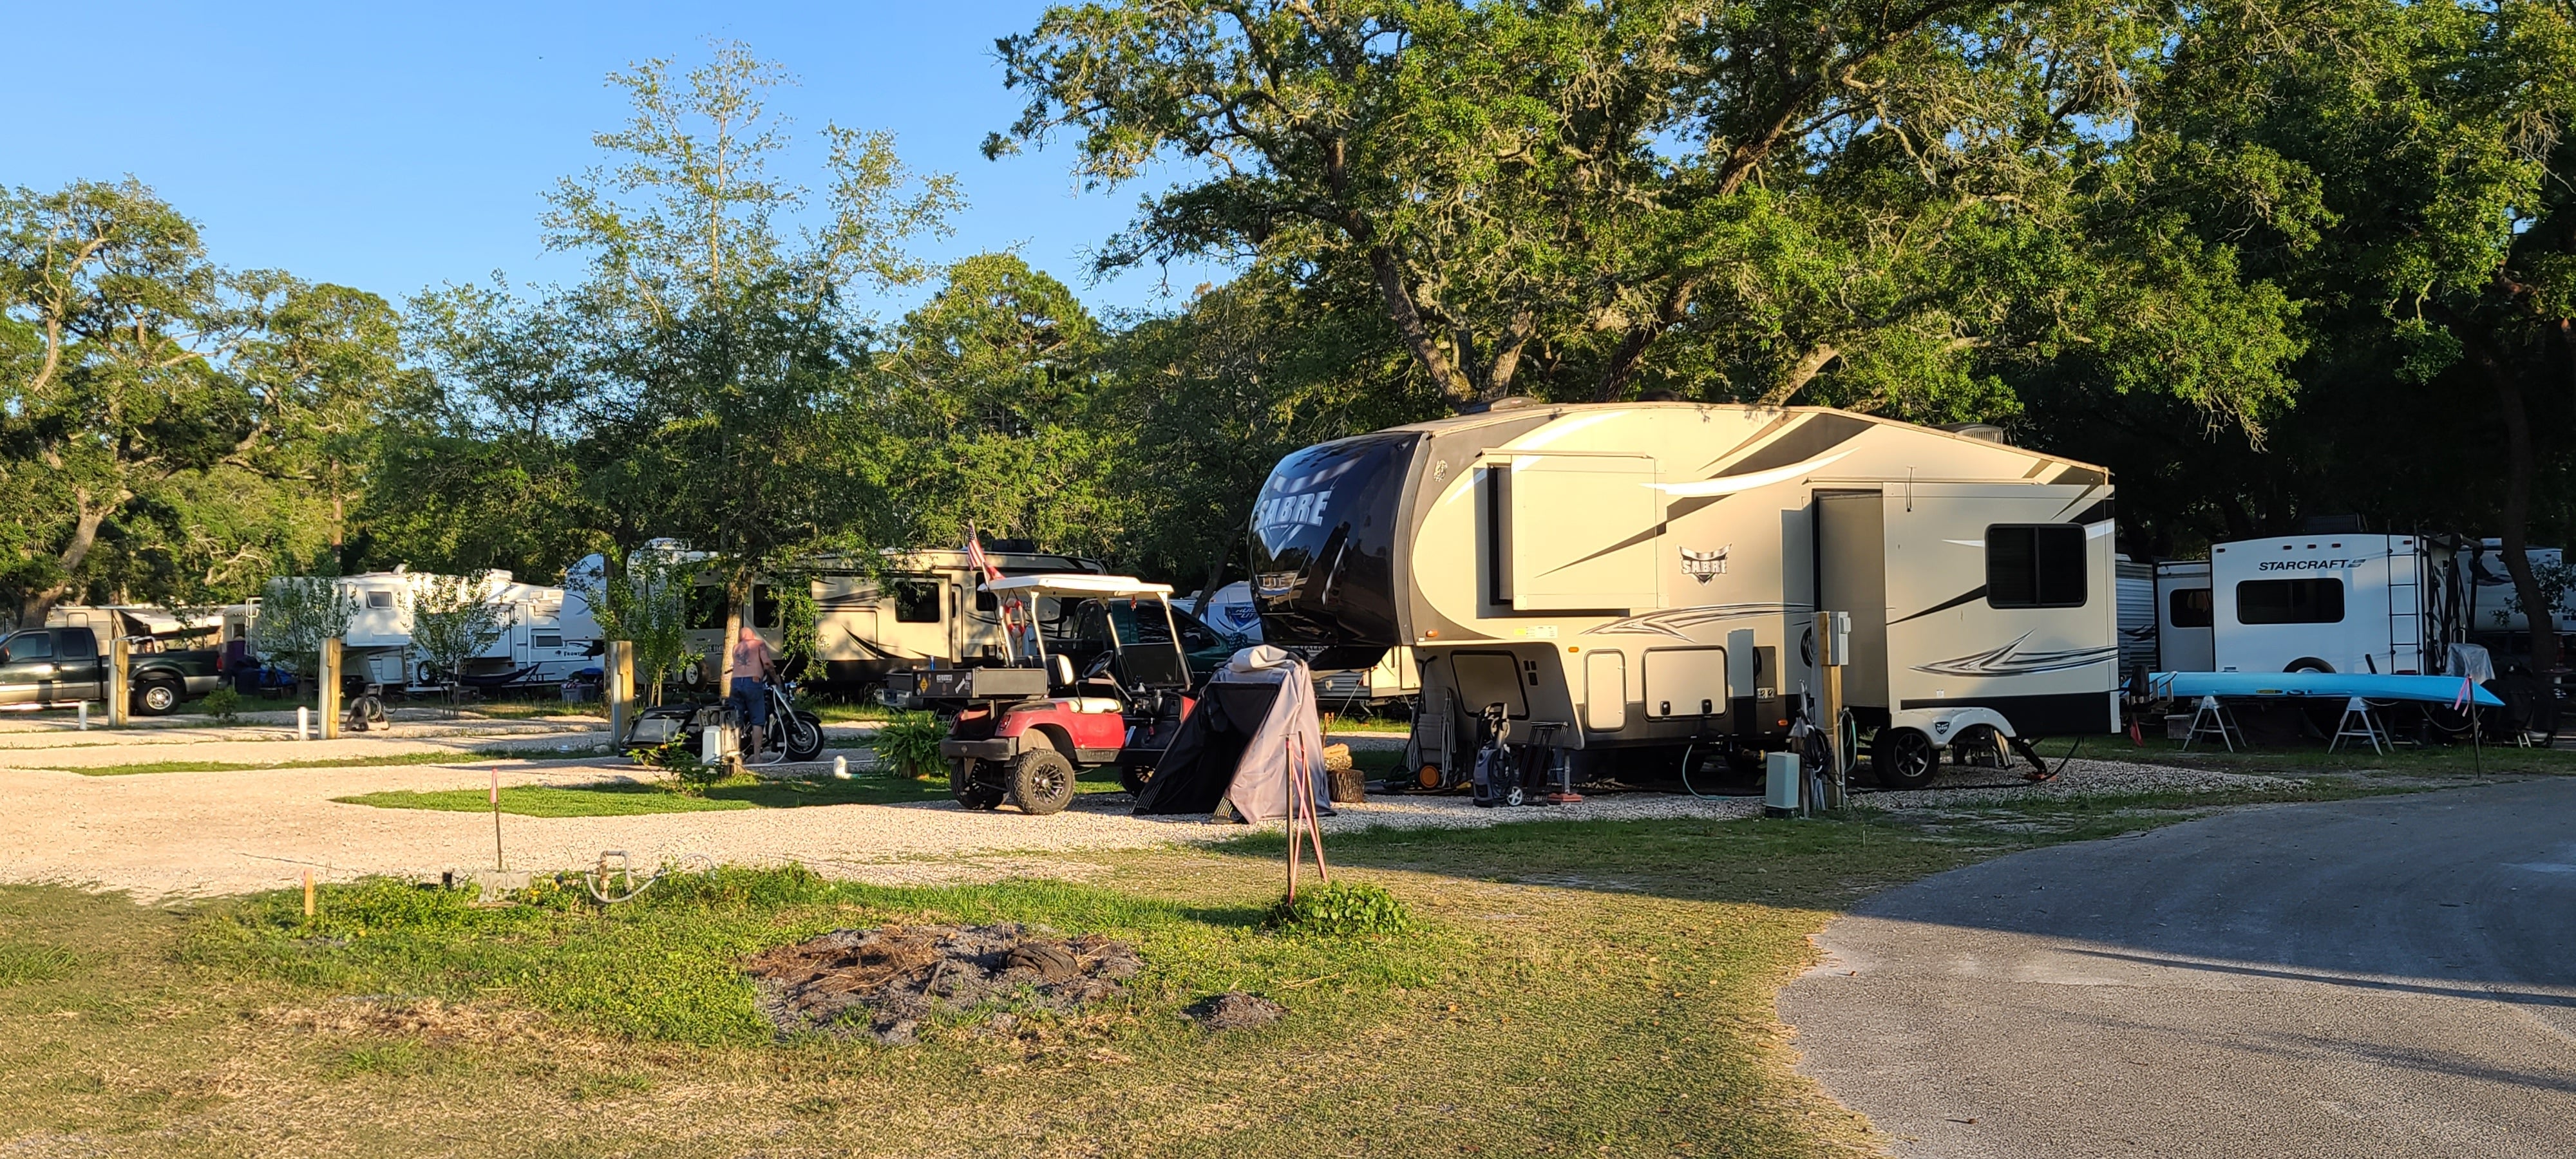 Camper submitted image from Panacea RV Park - 4